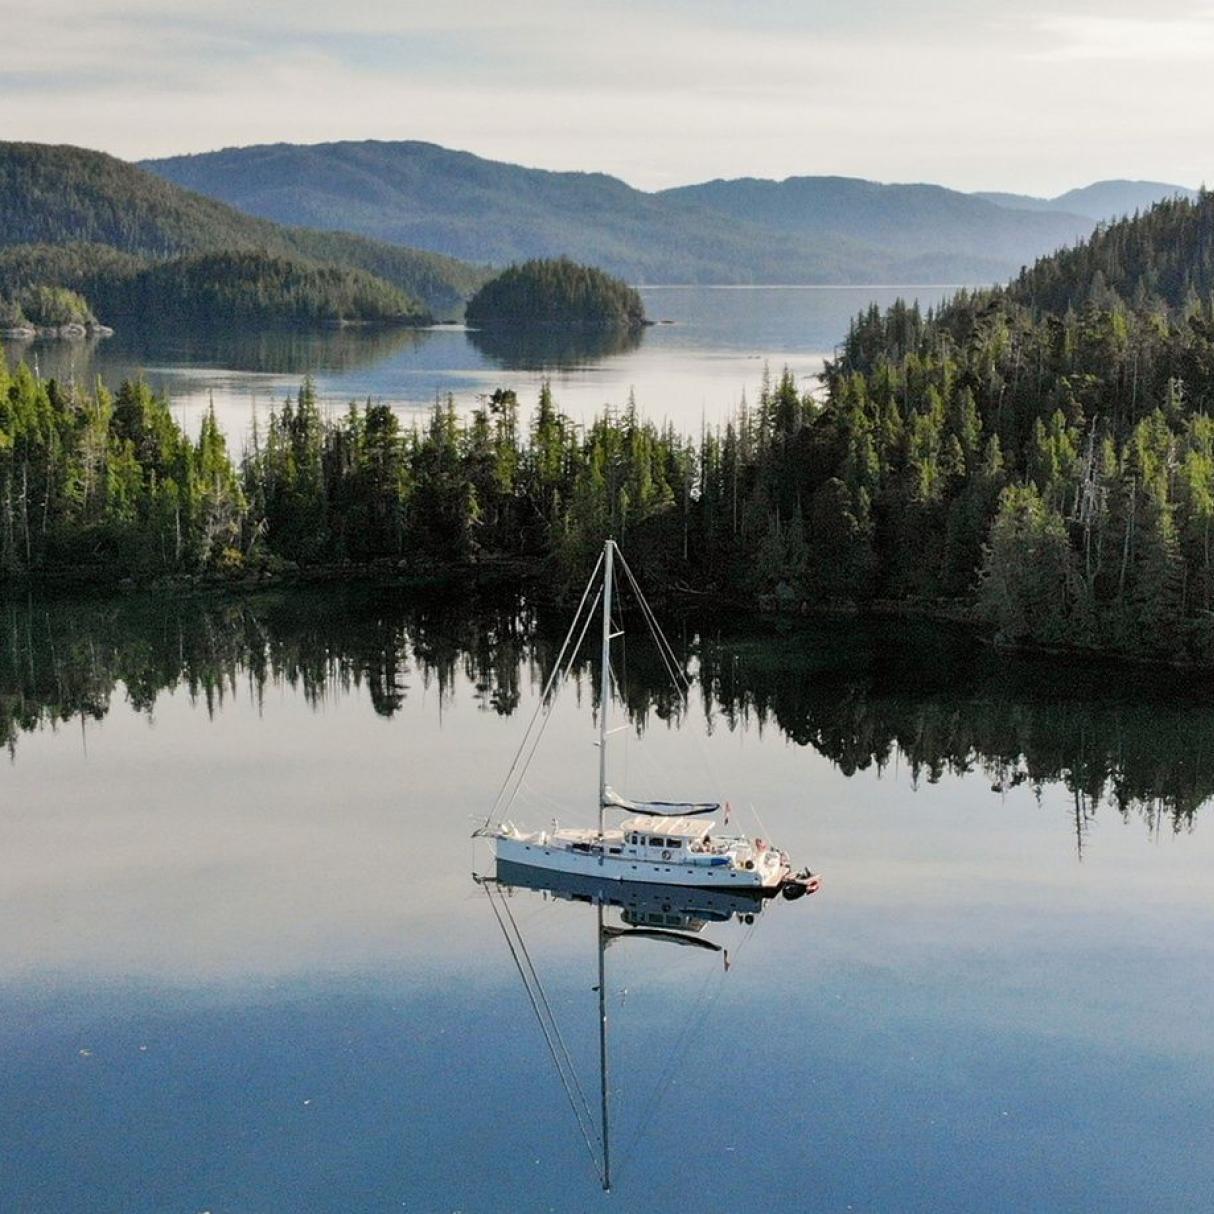 A sailboat sits anchored in an ocean inlet surrounded by green forested islands.